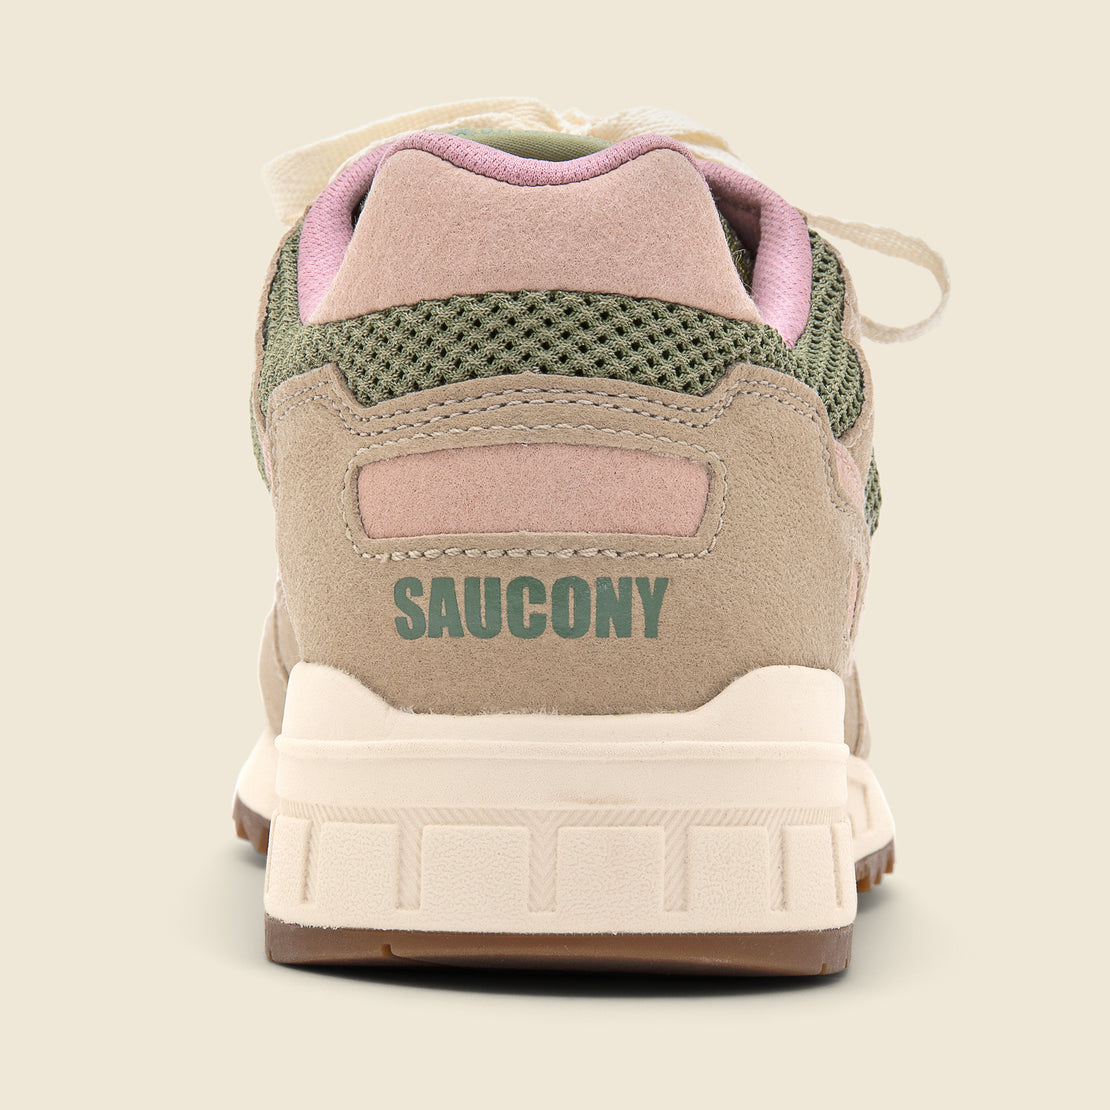 Shadow 5000 Mushroom Sneaker - Tan/Green/Pink - Saucony - STAG Provisions - Shoes - Athletic